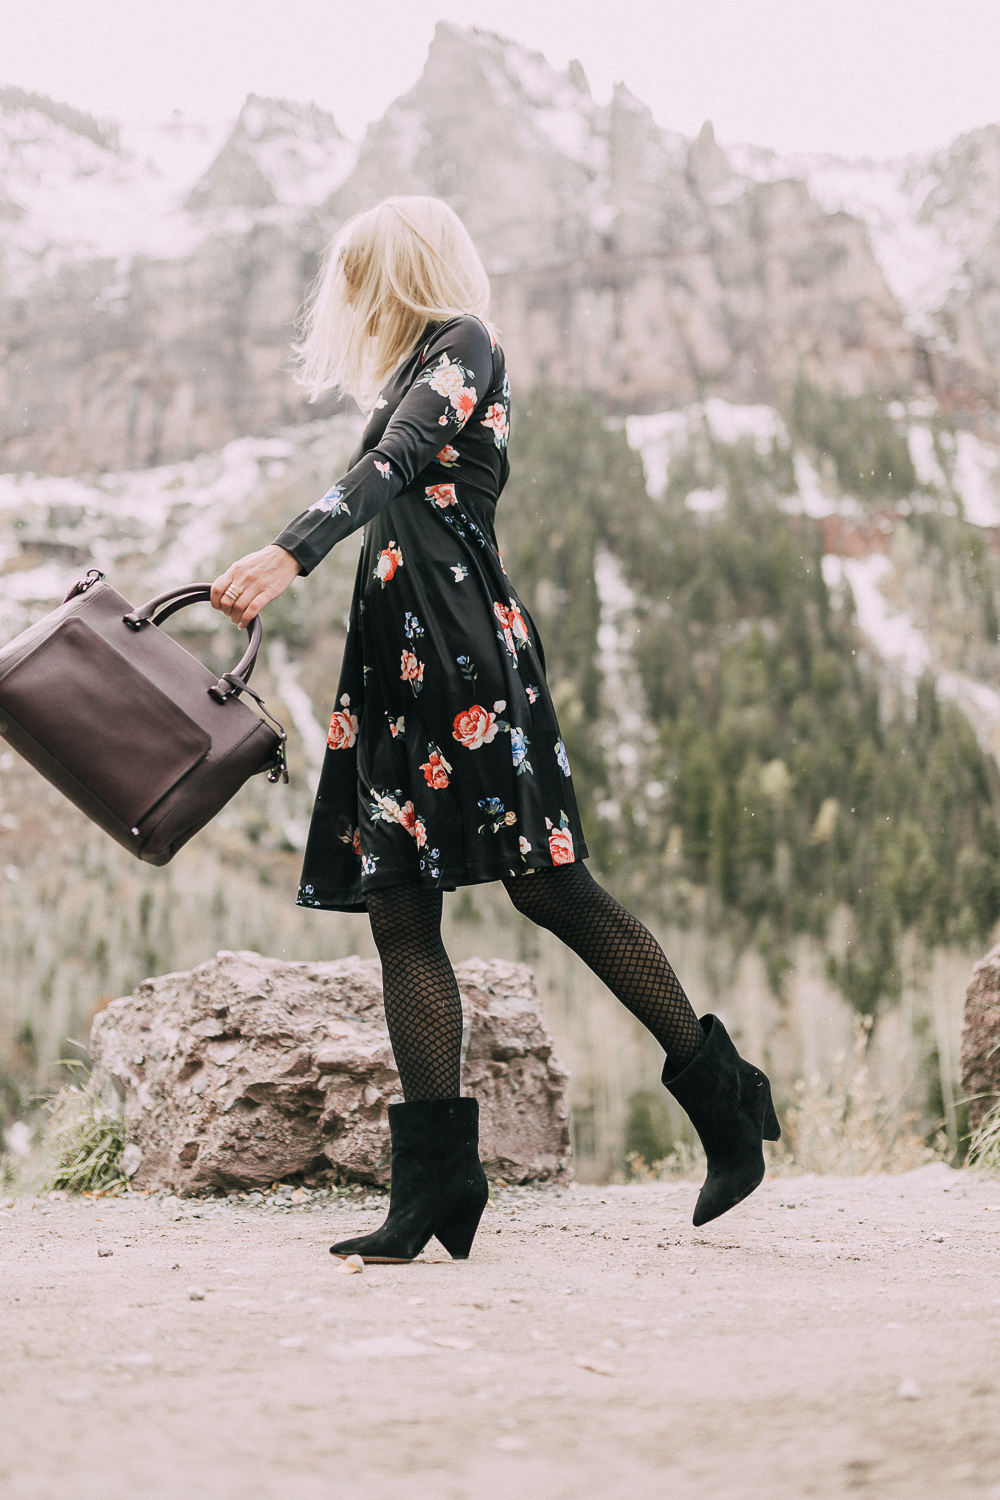 black regina Suede Booties by Vince Camuto paired with black floral print dress and leather burgundy tote bag on blonde woman in rocky mountains